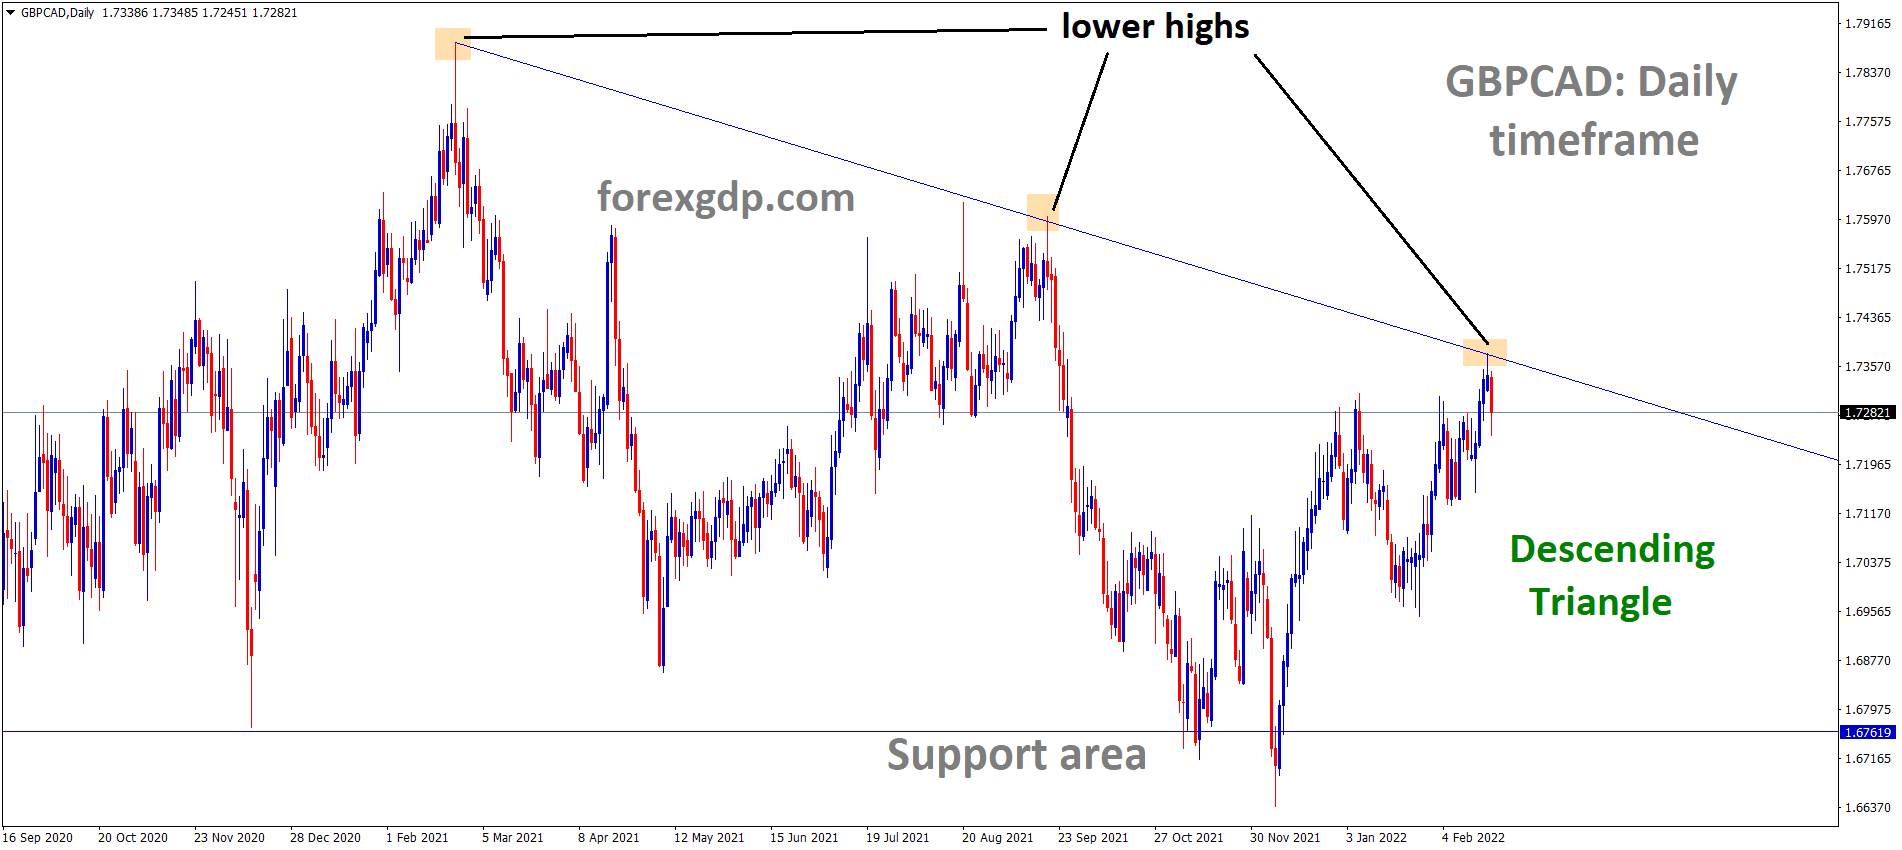 GBPCAD is moving in the Descending triangle pattern and the market has fallen from the lower high area of the pattern